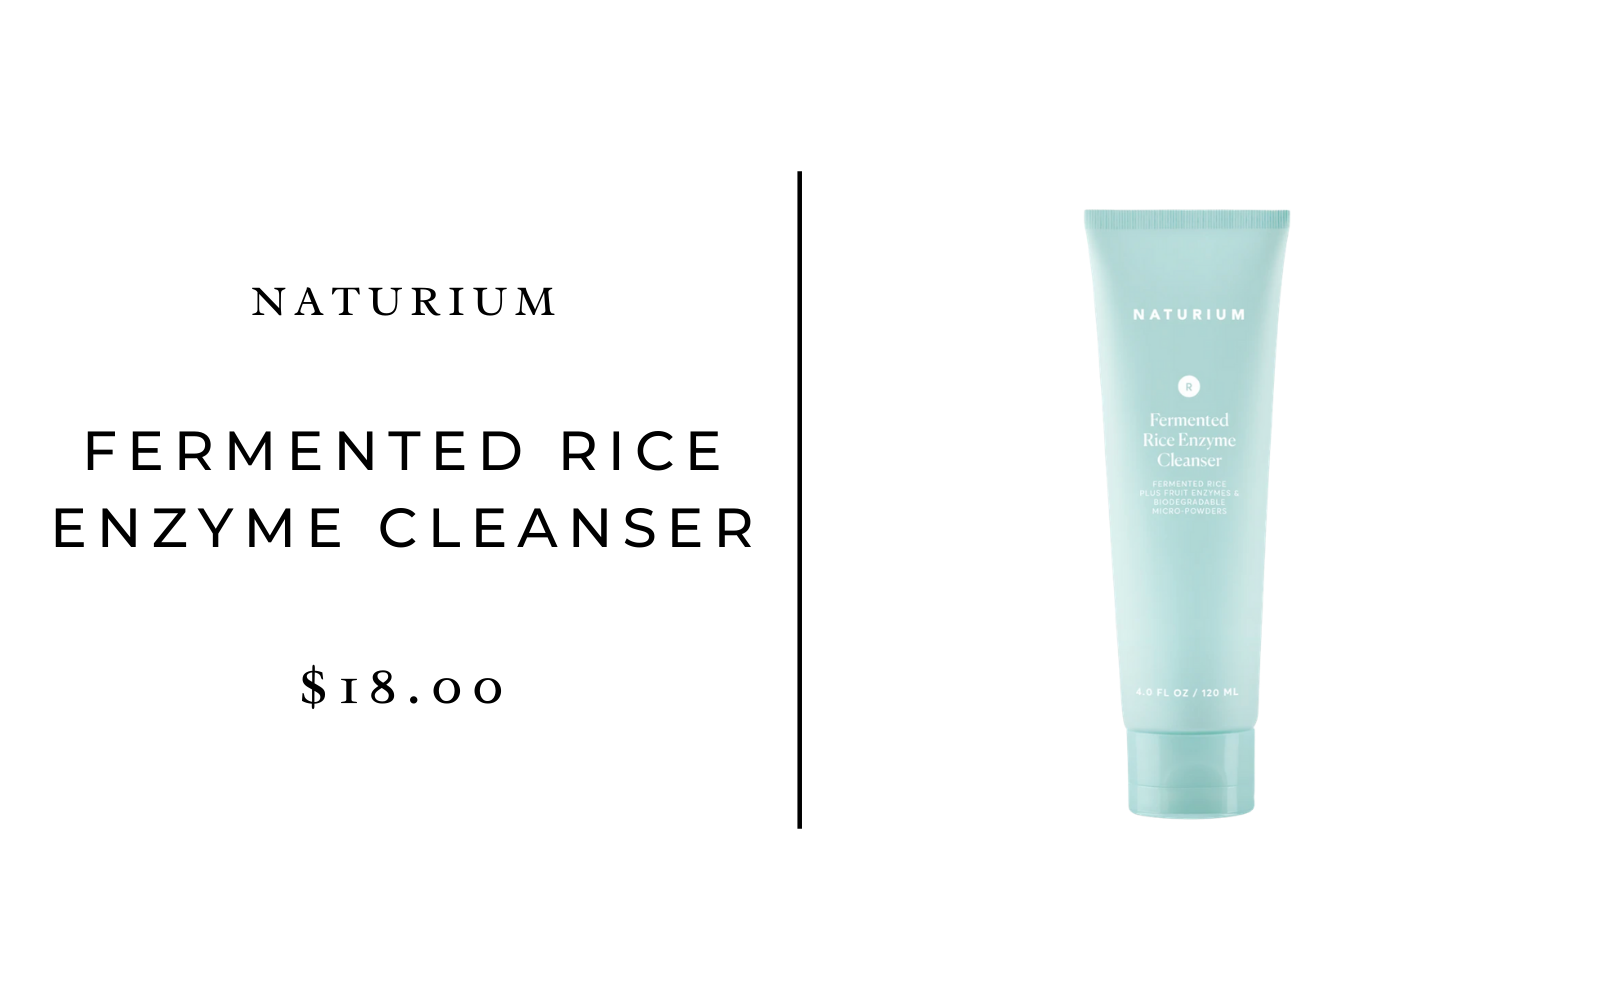 Naturium Fermented Rice Enzyme Cleanser